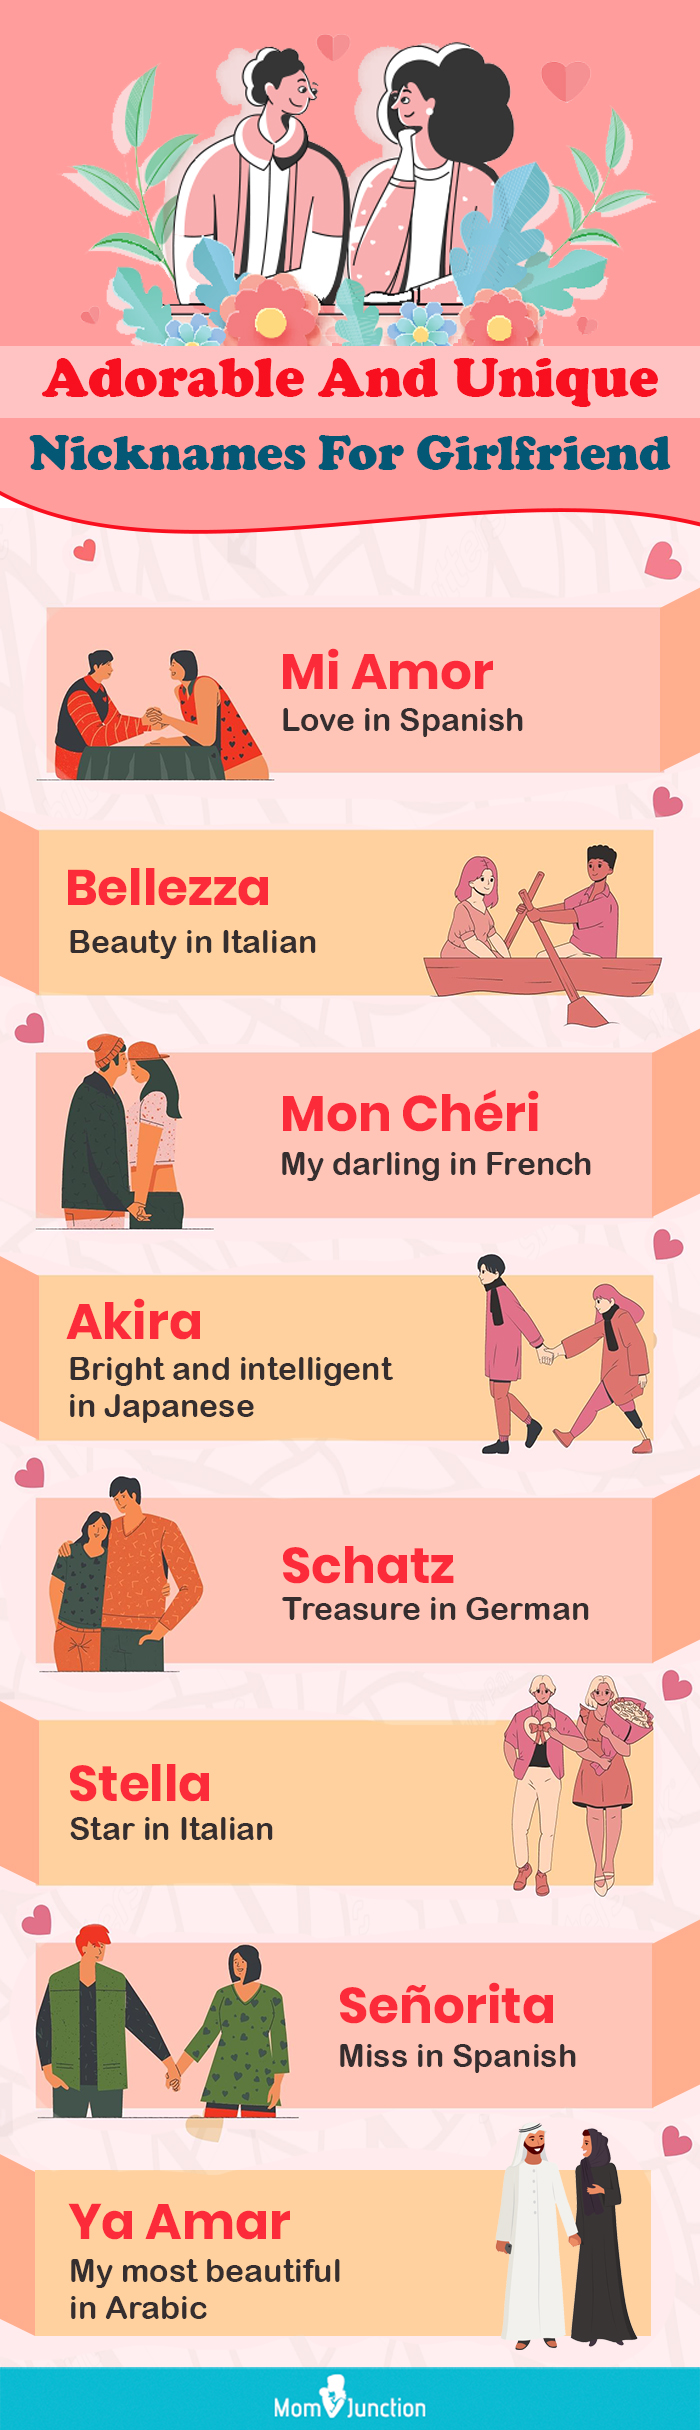 unique nicknames for girlfriend [infographic]